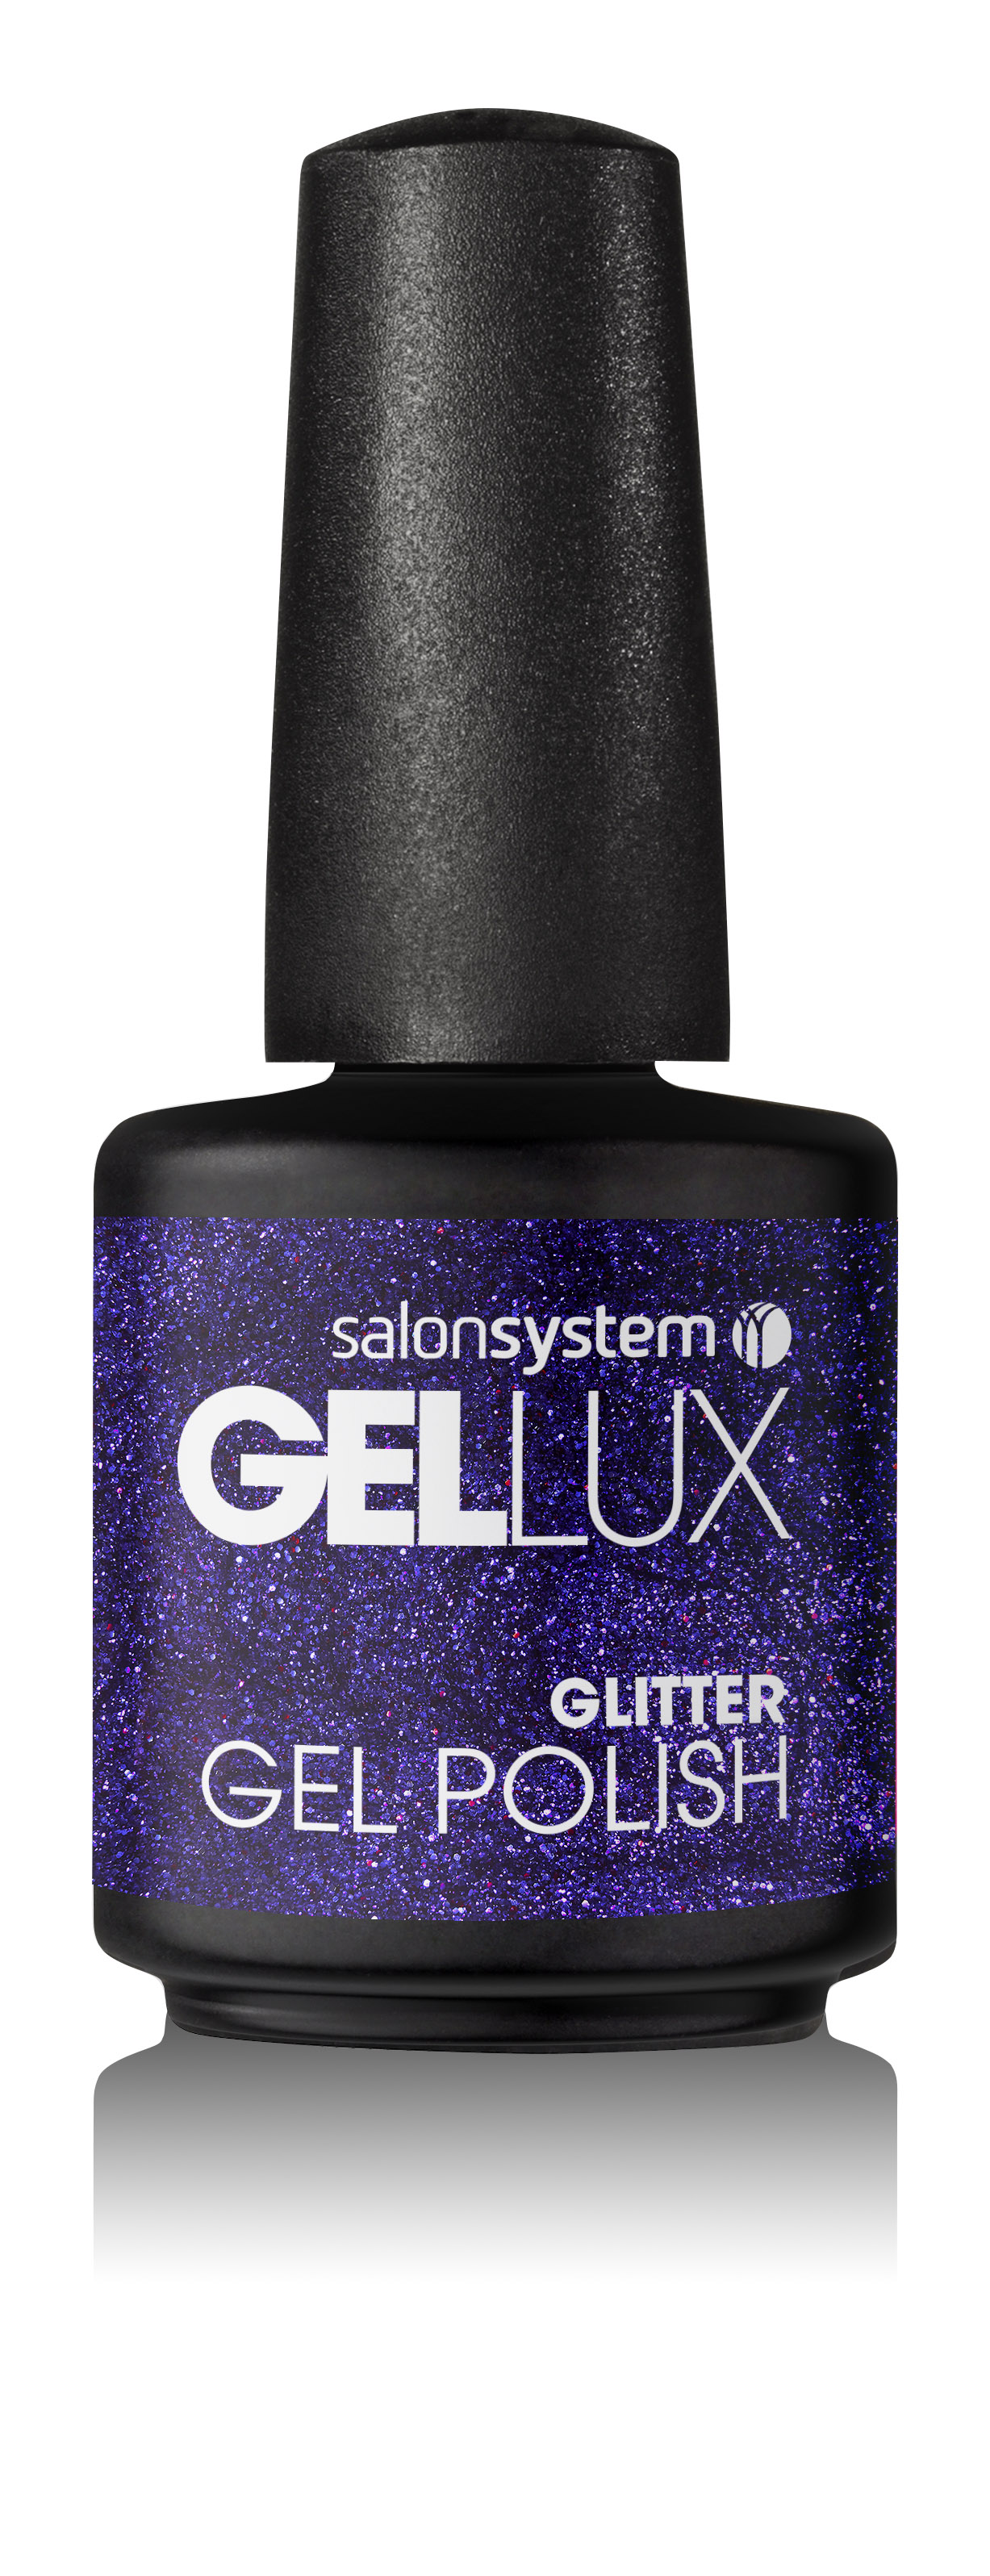 Gellux Rave Review